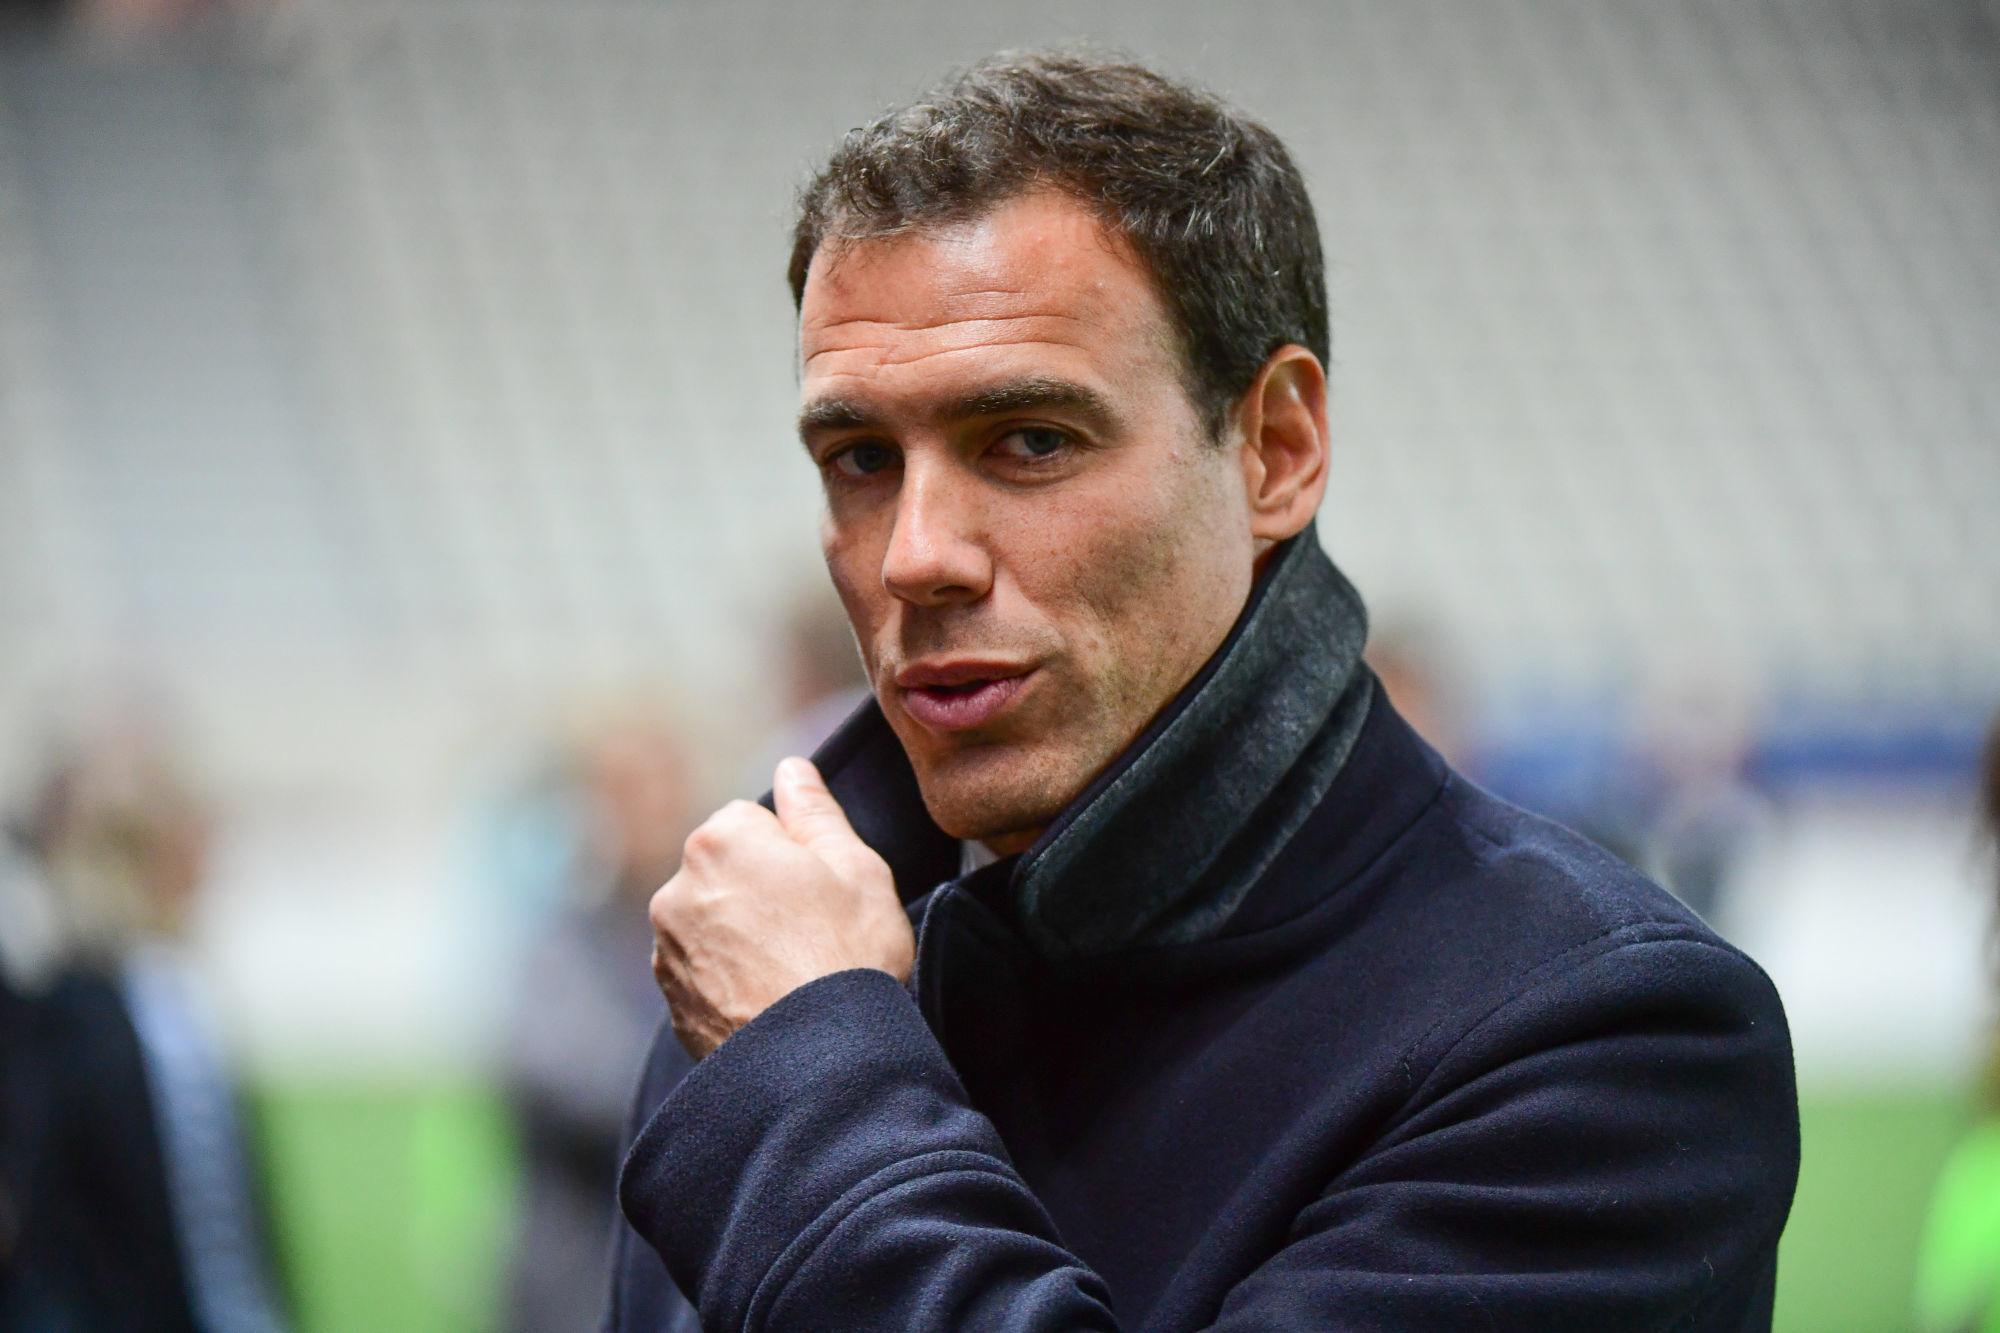 Sporting director of PSG women section Bruno CHEYROU during the Women UEFA Champions League match between Paris Saint Germain and Breioablik Kopavogur at Stade Jean Bouin on October 31, 2019 in Paris, France. (Photo by Dave Winter/Icon Sport) - Bruno CHEYROU - Stade Georges Lefevre - Paris (France)